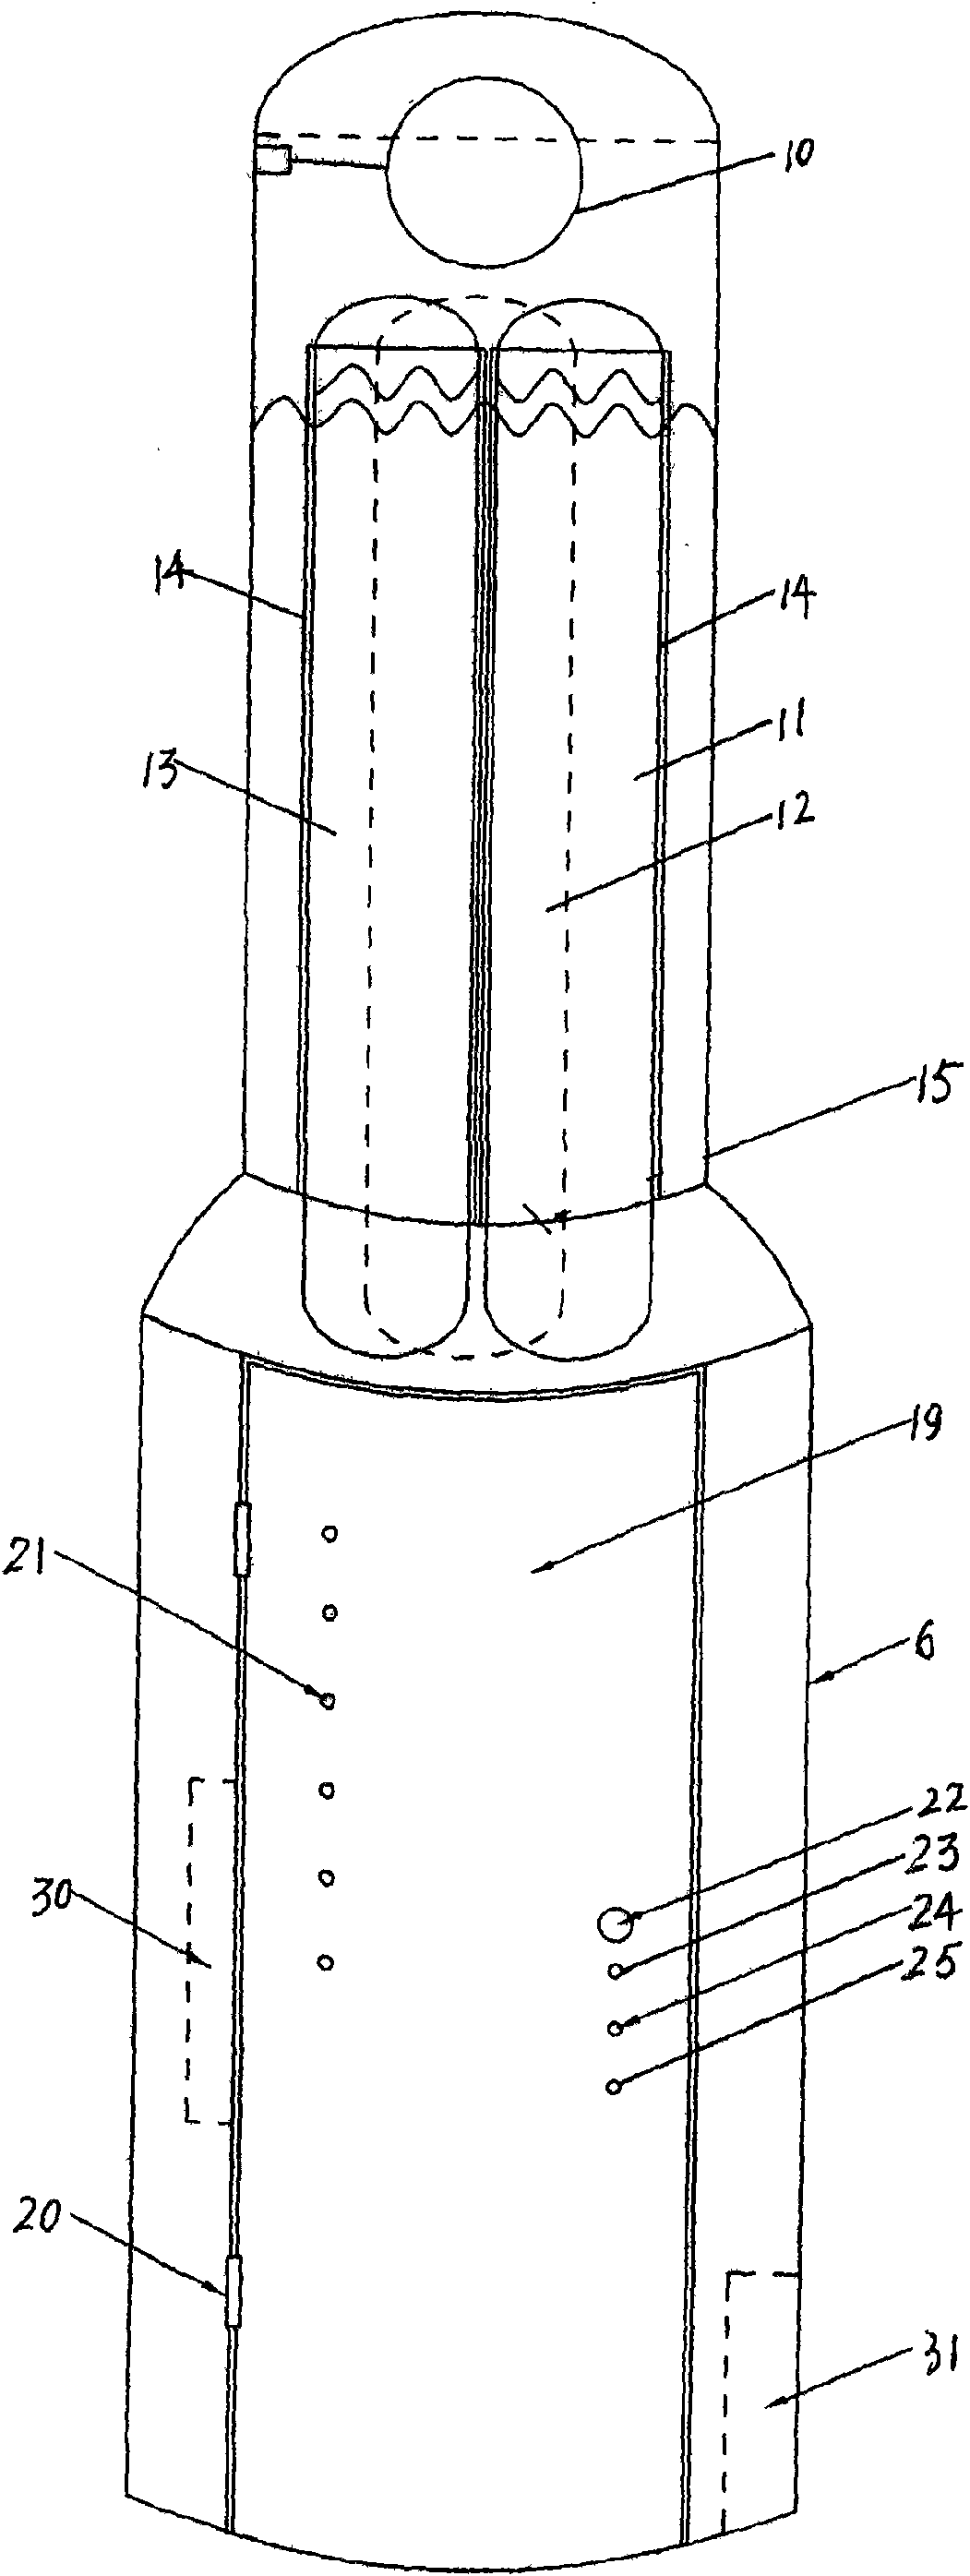 High-pressure boiler provided with full-automatic water adding device